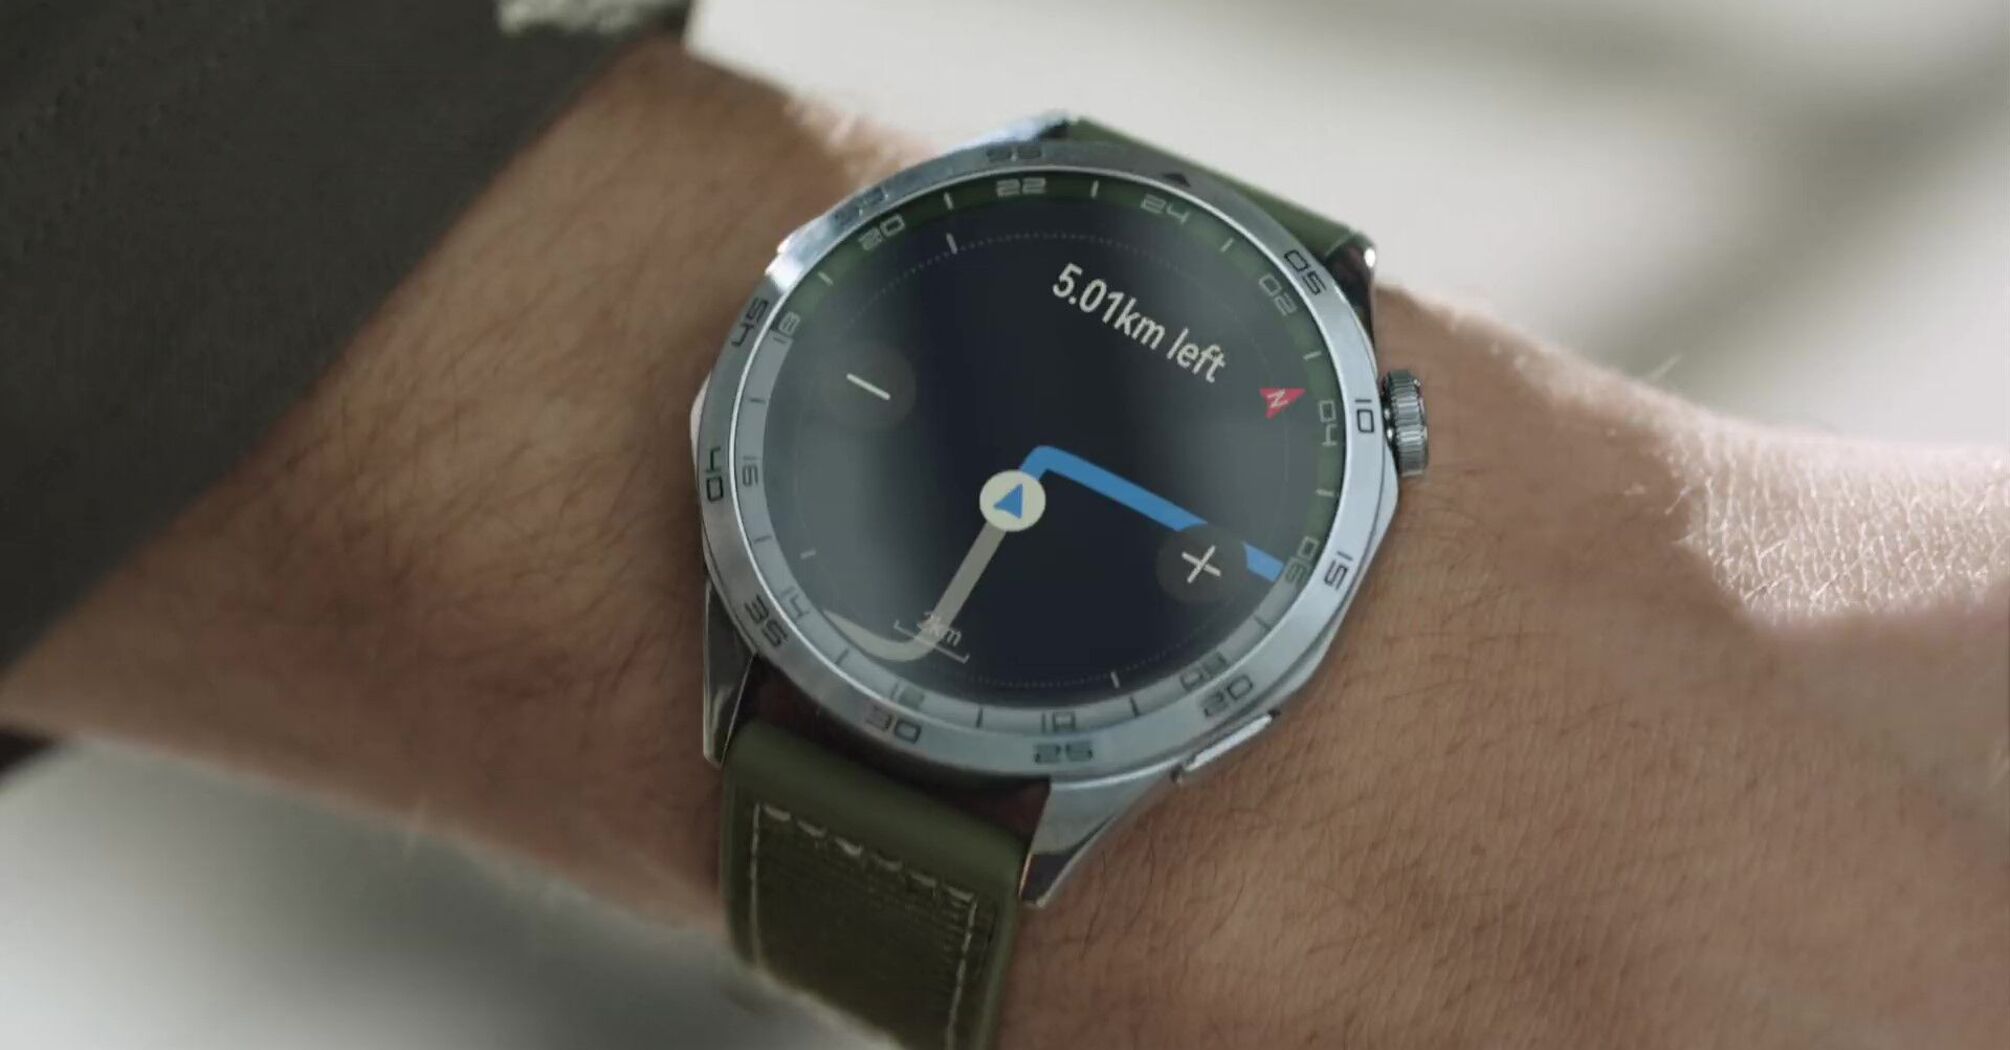 HUAWEI Watch GT 4: an overview of the smartwatch